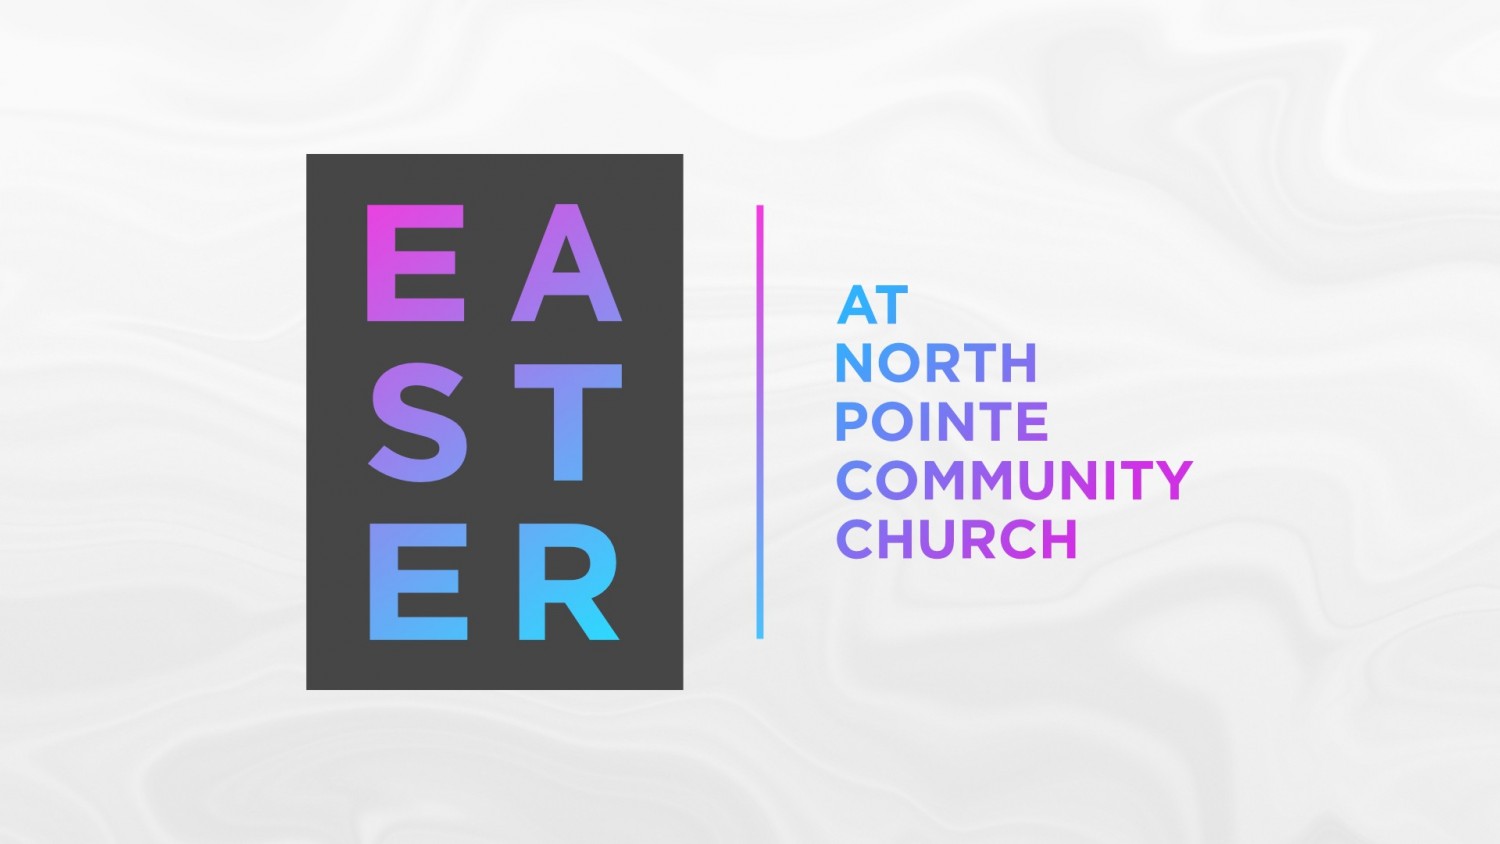 VISITING NORTH POINTE AT EASTER